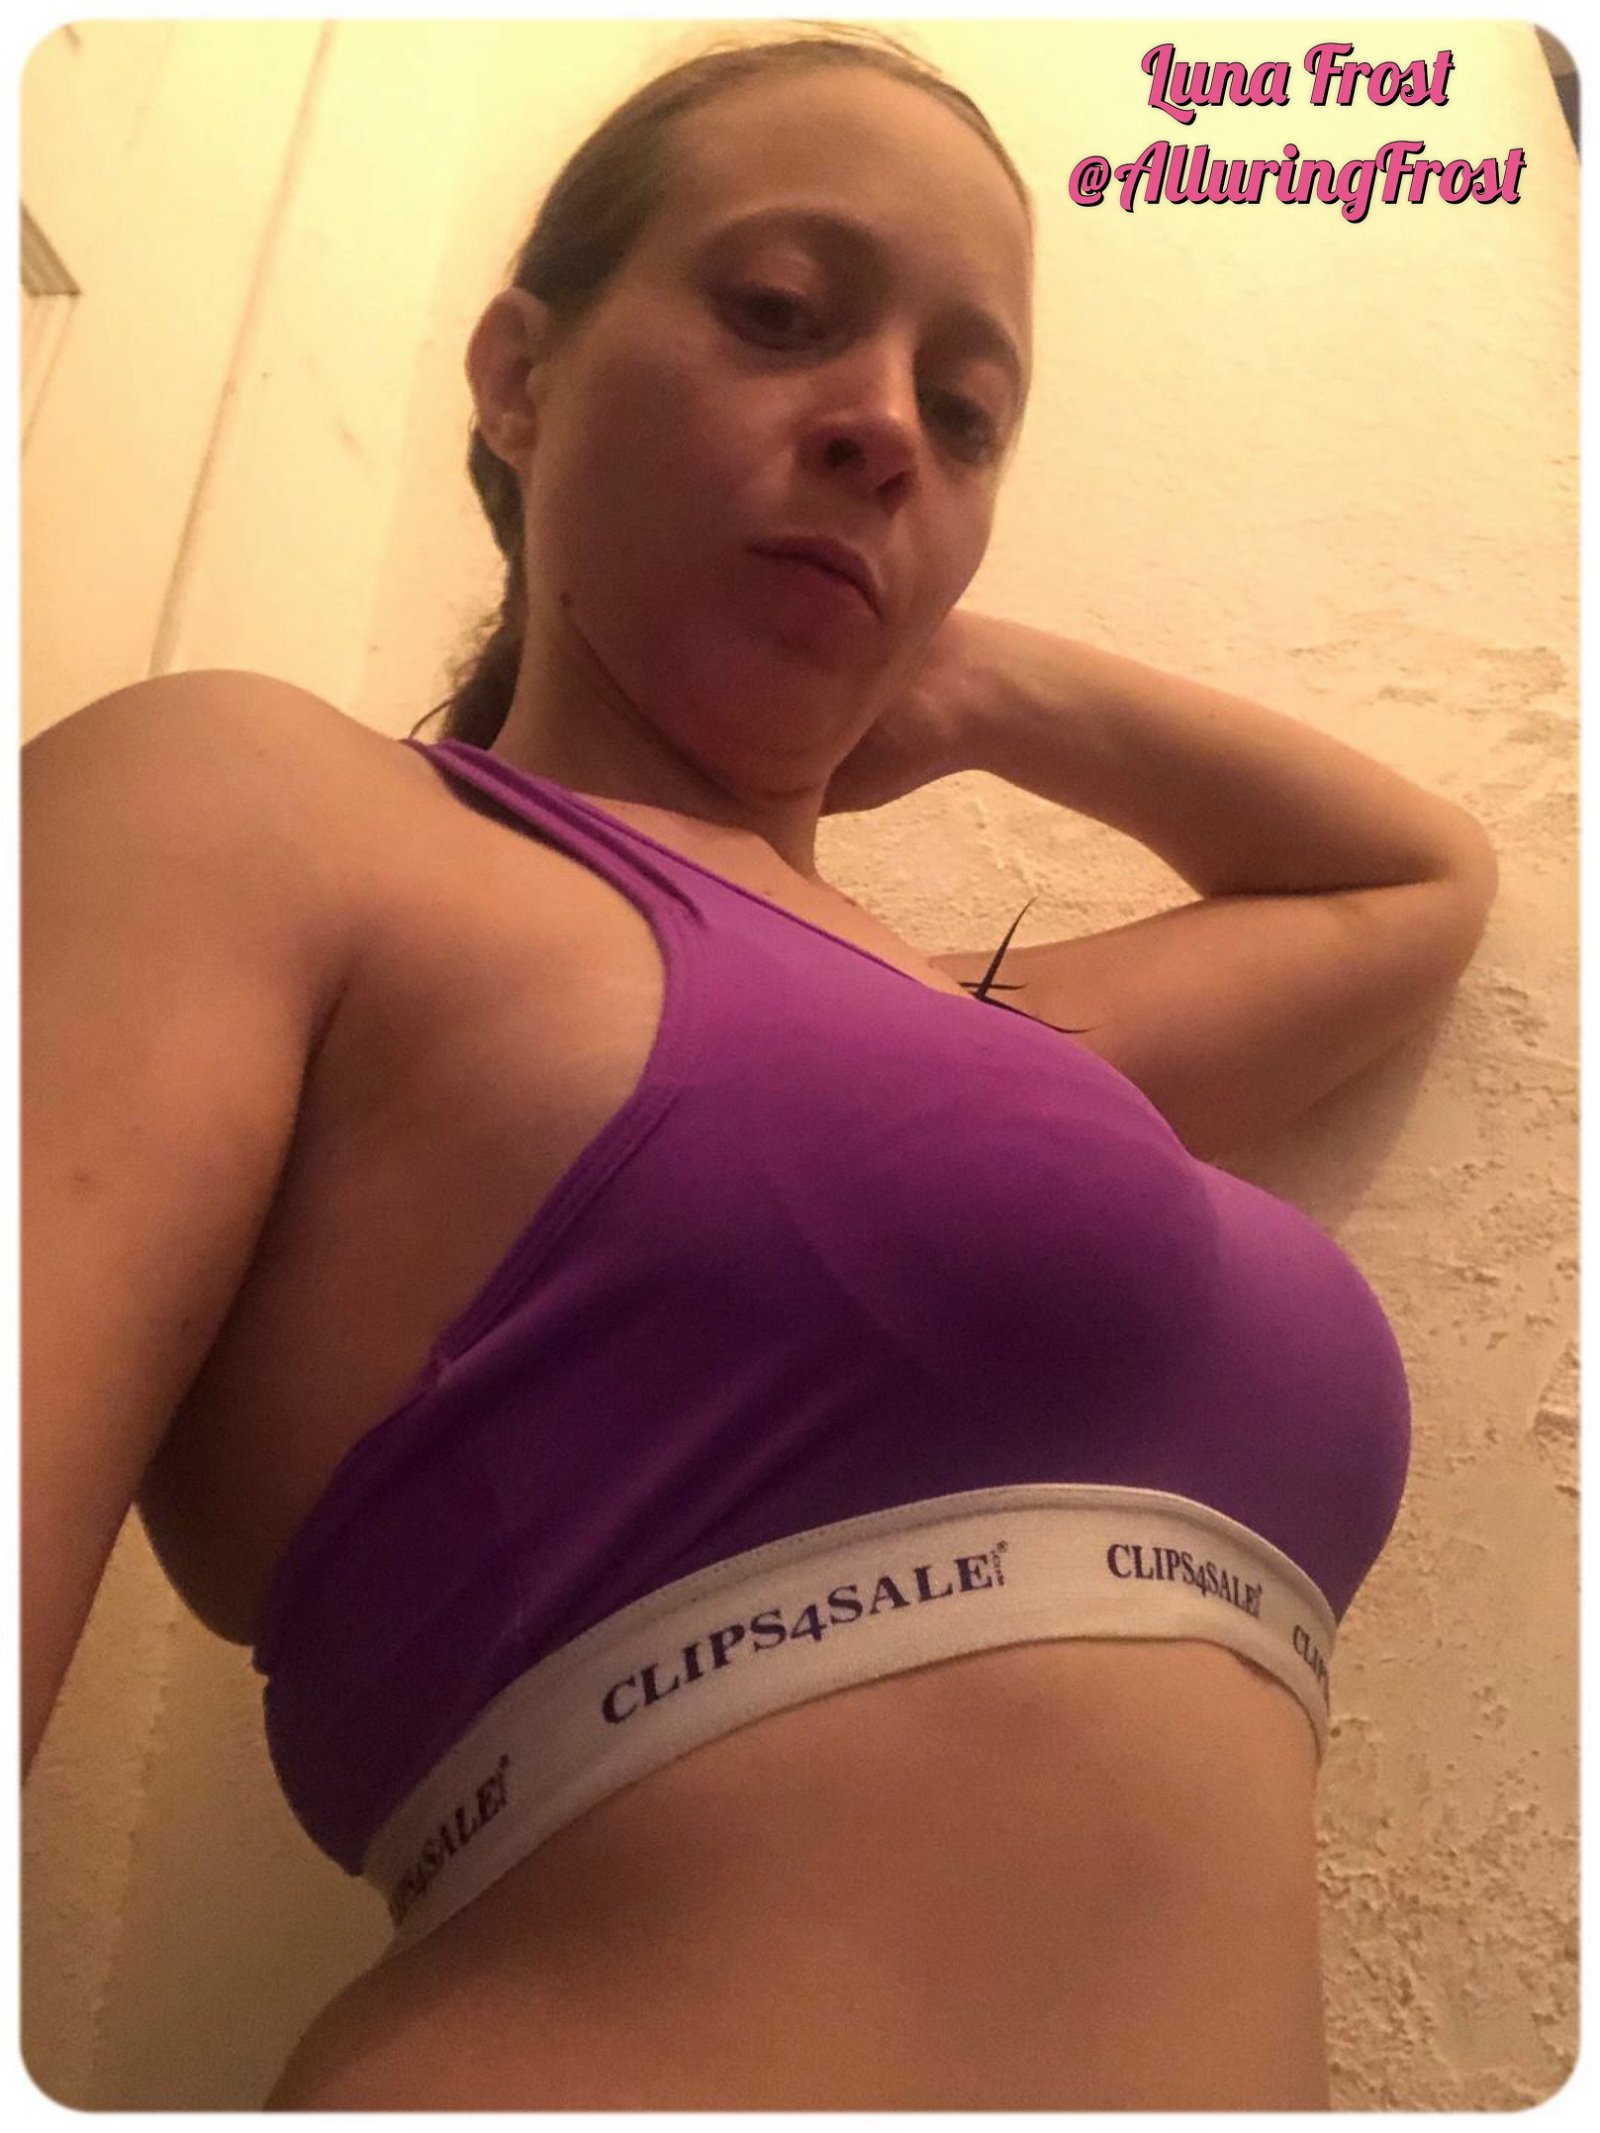 Photo by Luna Frost with the username @cannapoet, who is a star user,  September 24, 2019 at 7:18 PM and the text says 'Another Pic of me in the Clips4Sale Lingerie'